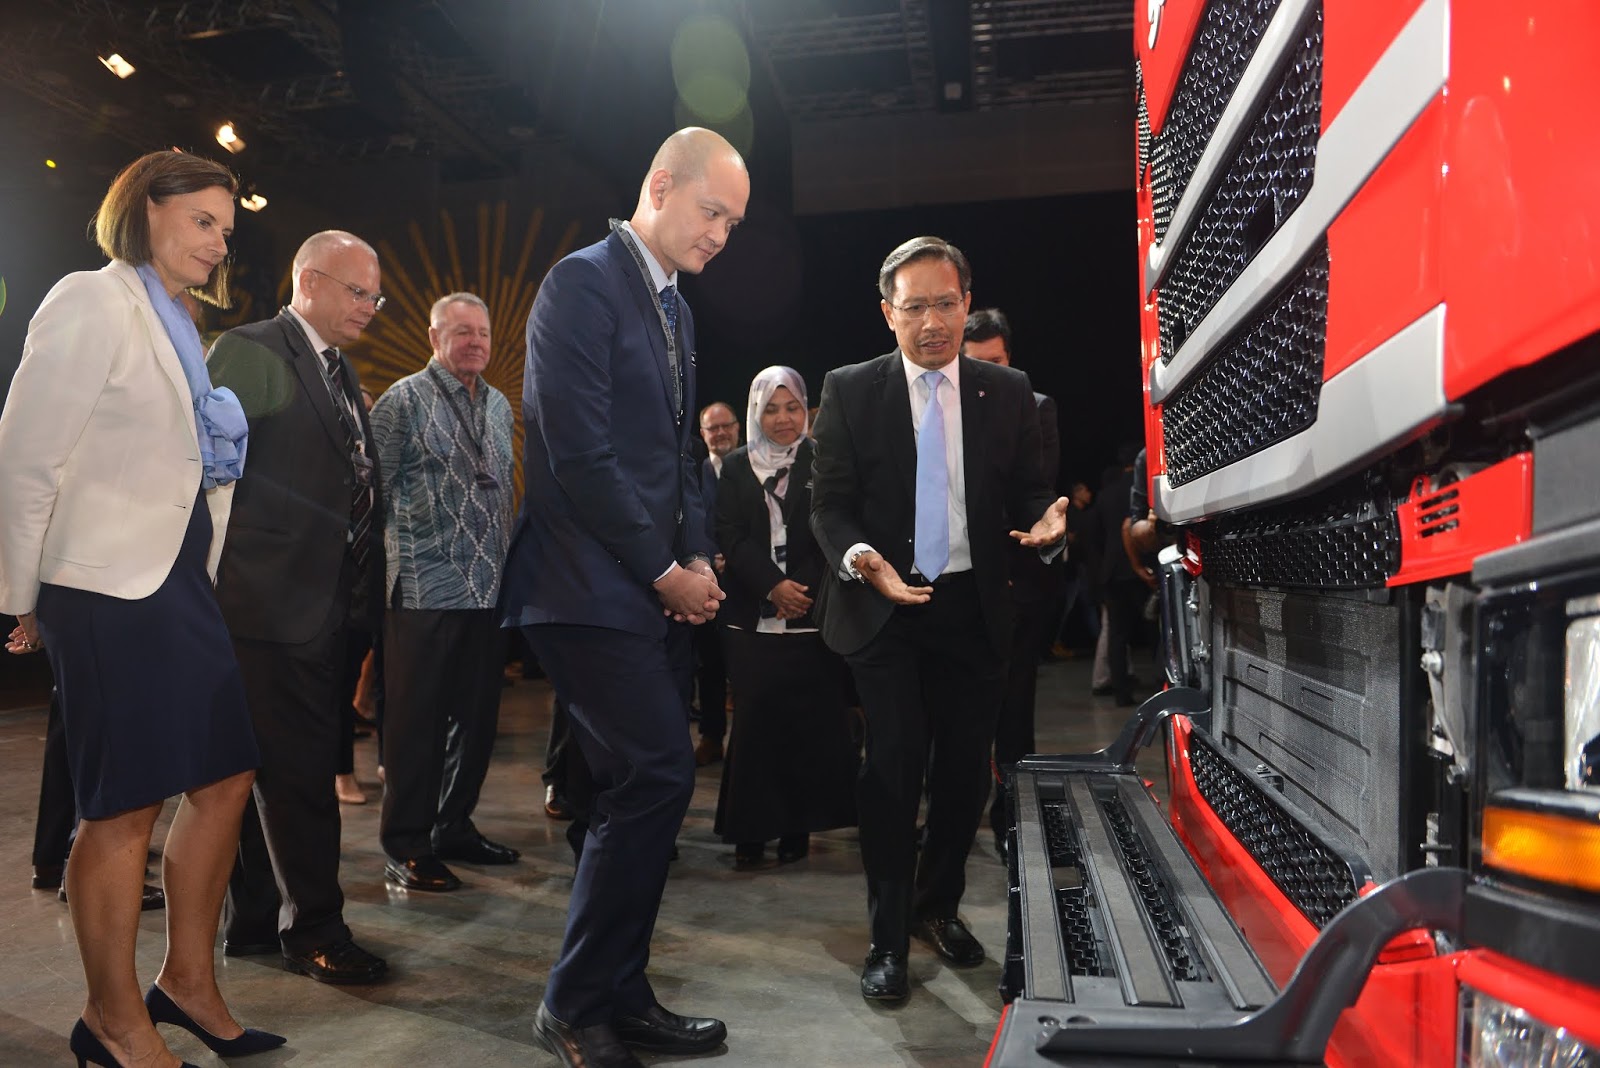 Motoring-Malaysia: Scania Launches their Award Winning New Truck